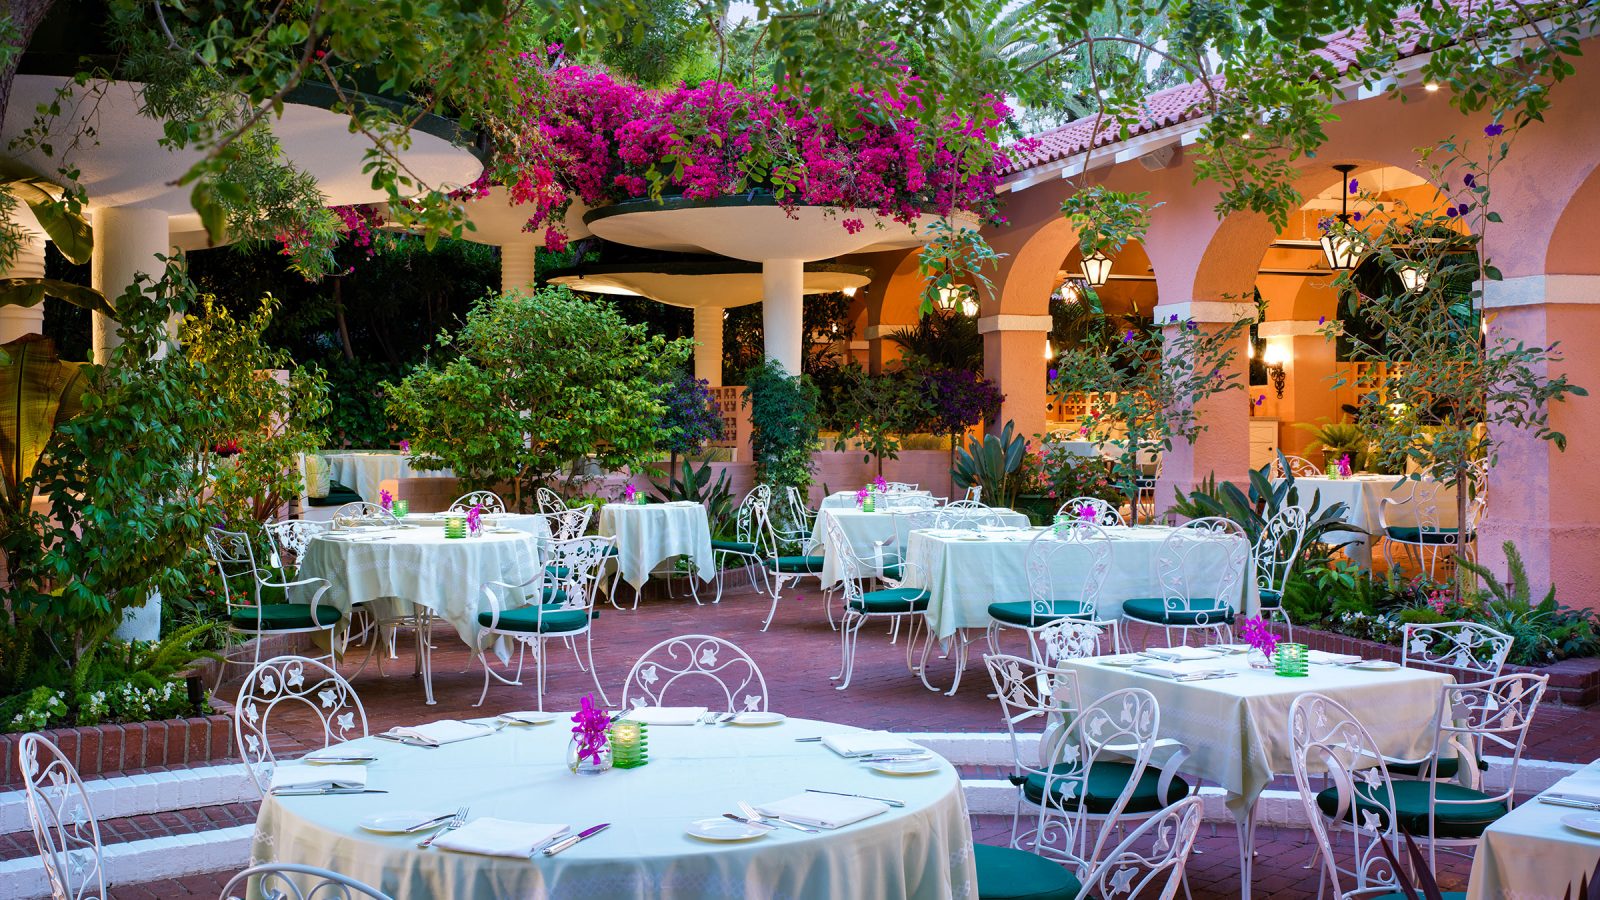 Beverly Hills Hotel Polo Lounge Patio Area - Beverly Hills Hotel Restaurant , HD Wallpaper & Backgrounds